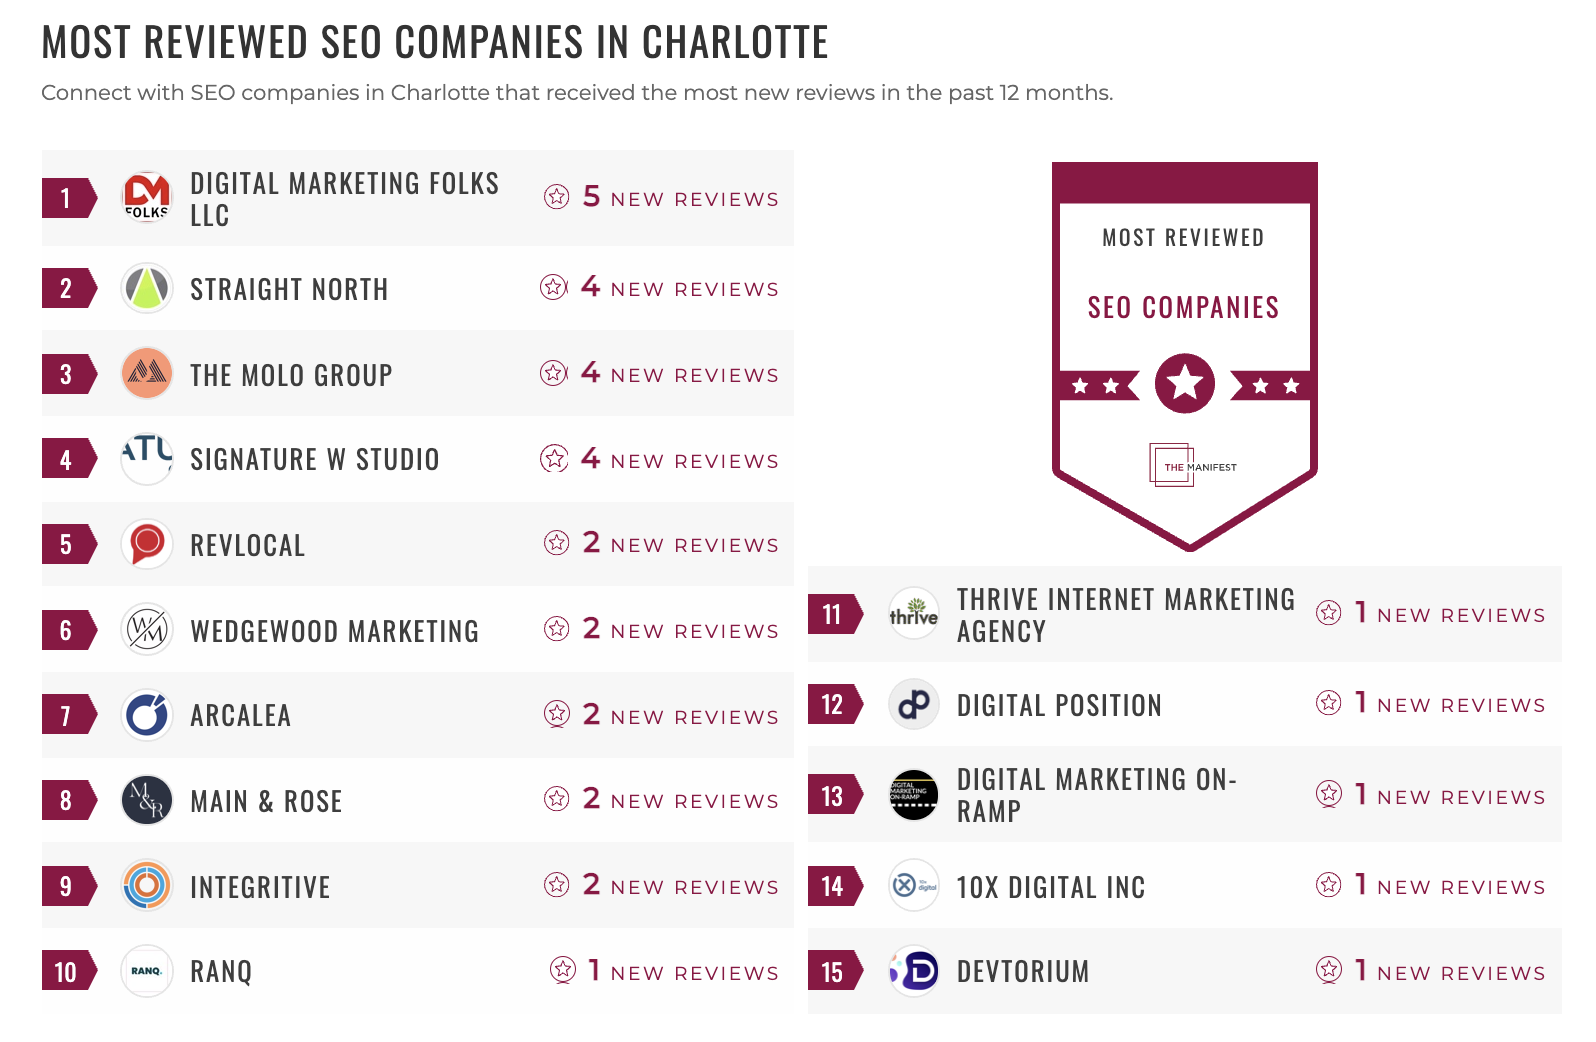 Most Reviewed SEO Companies in Charlotte